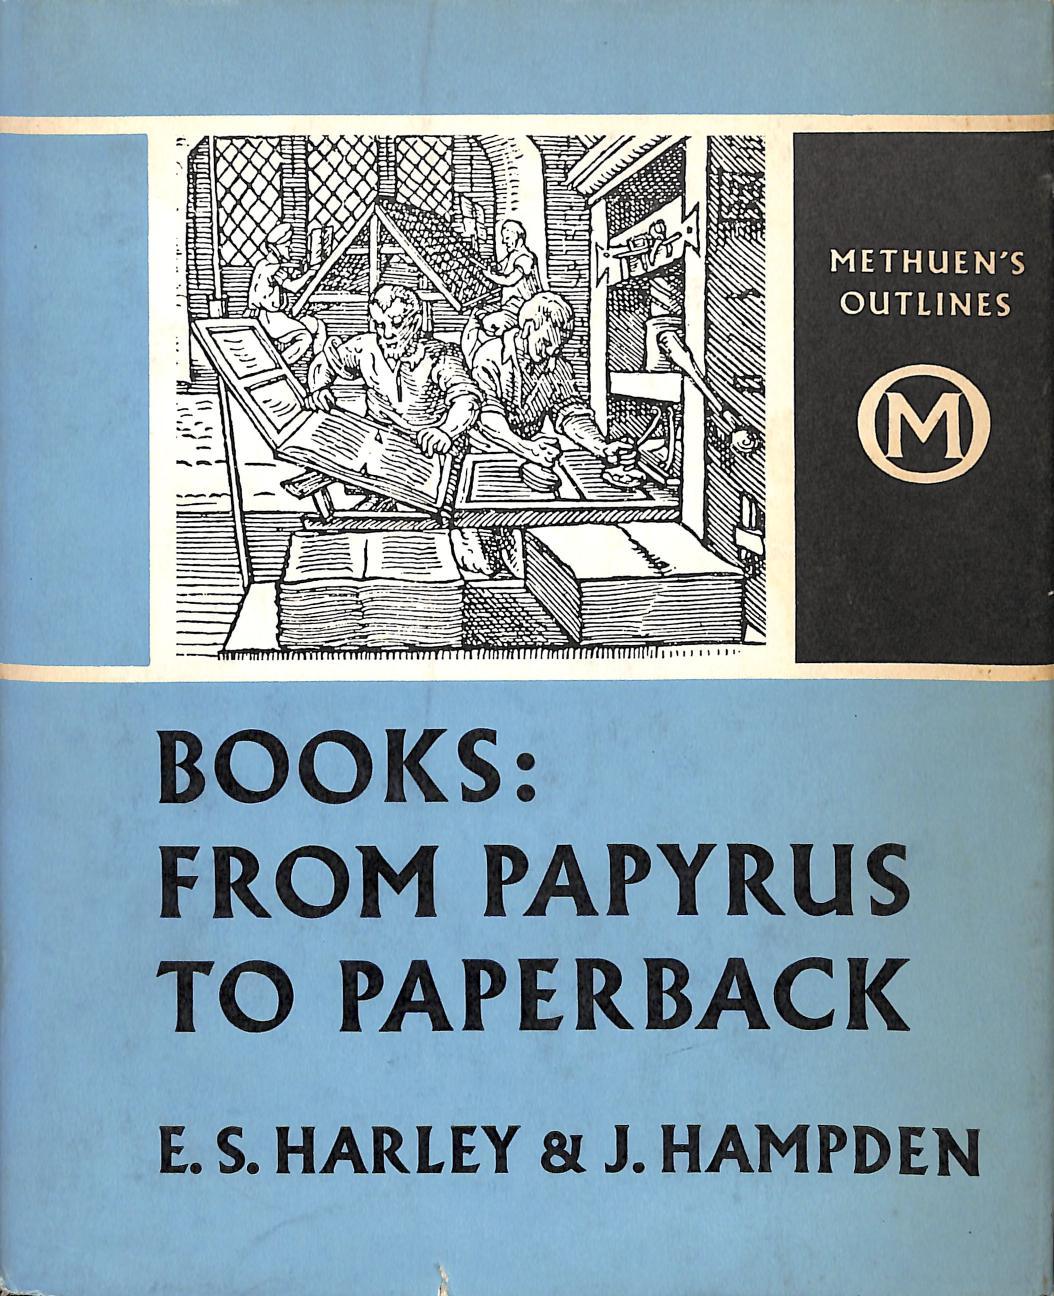 Books (Methuen's Outlines) (image)